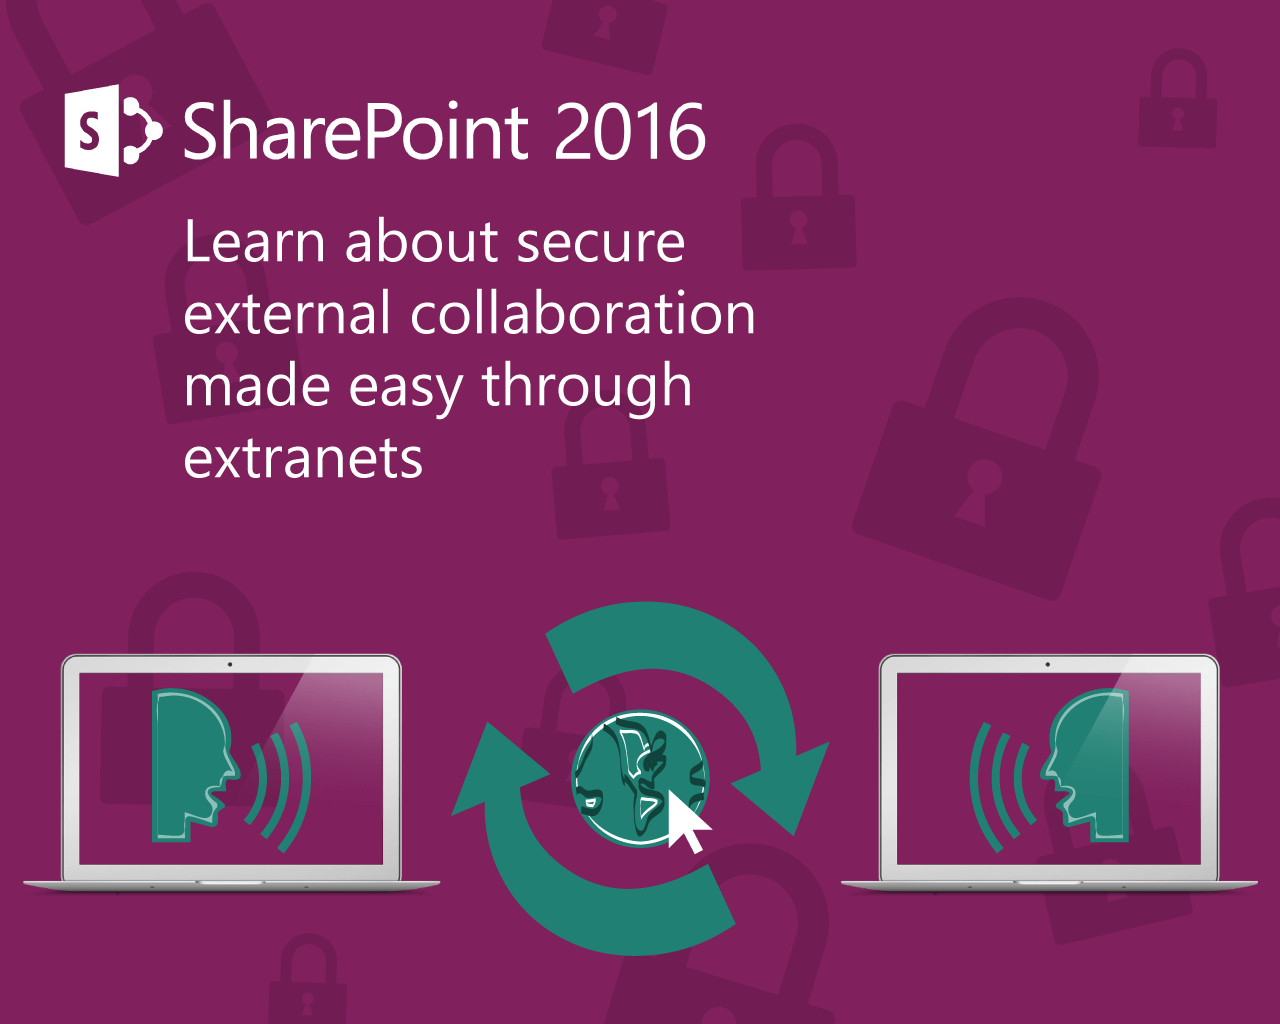 Extranets in SharePoint 2016